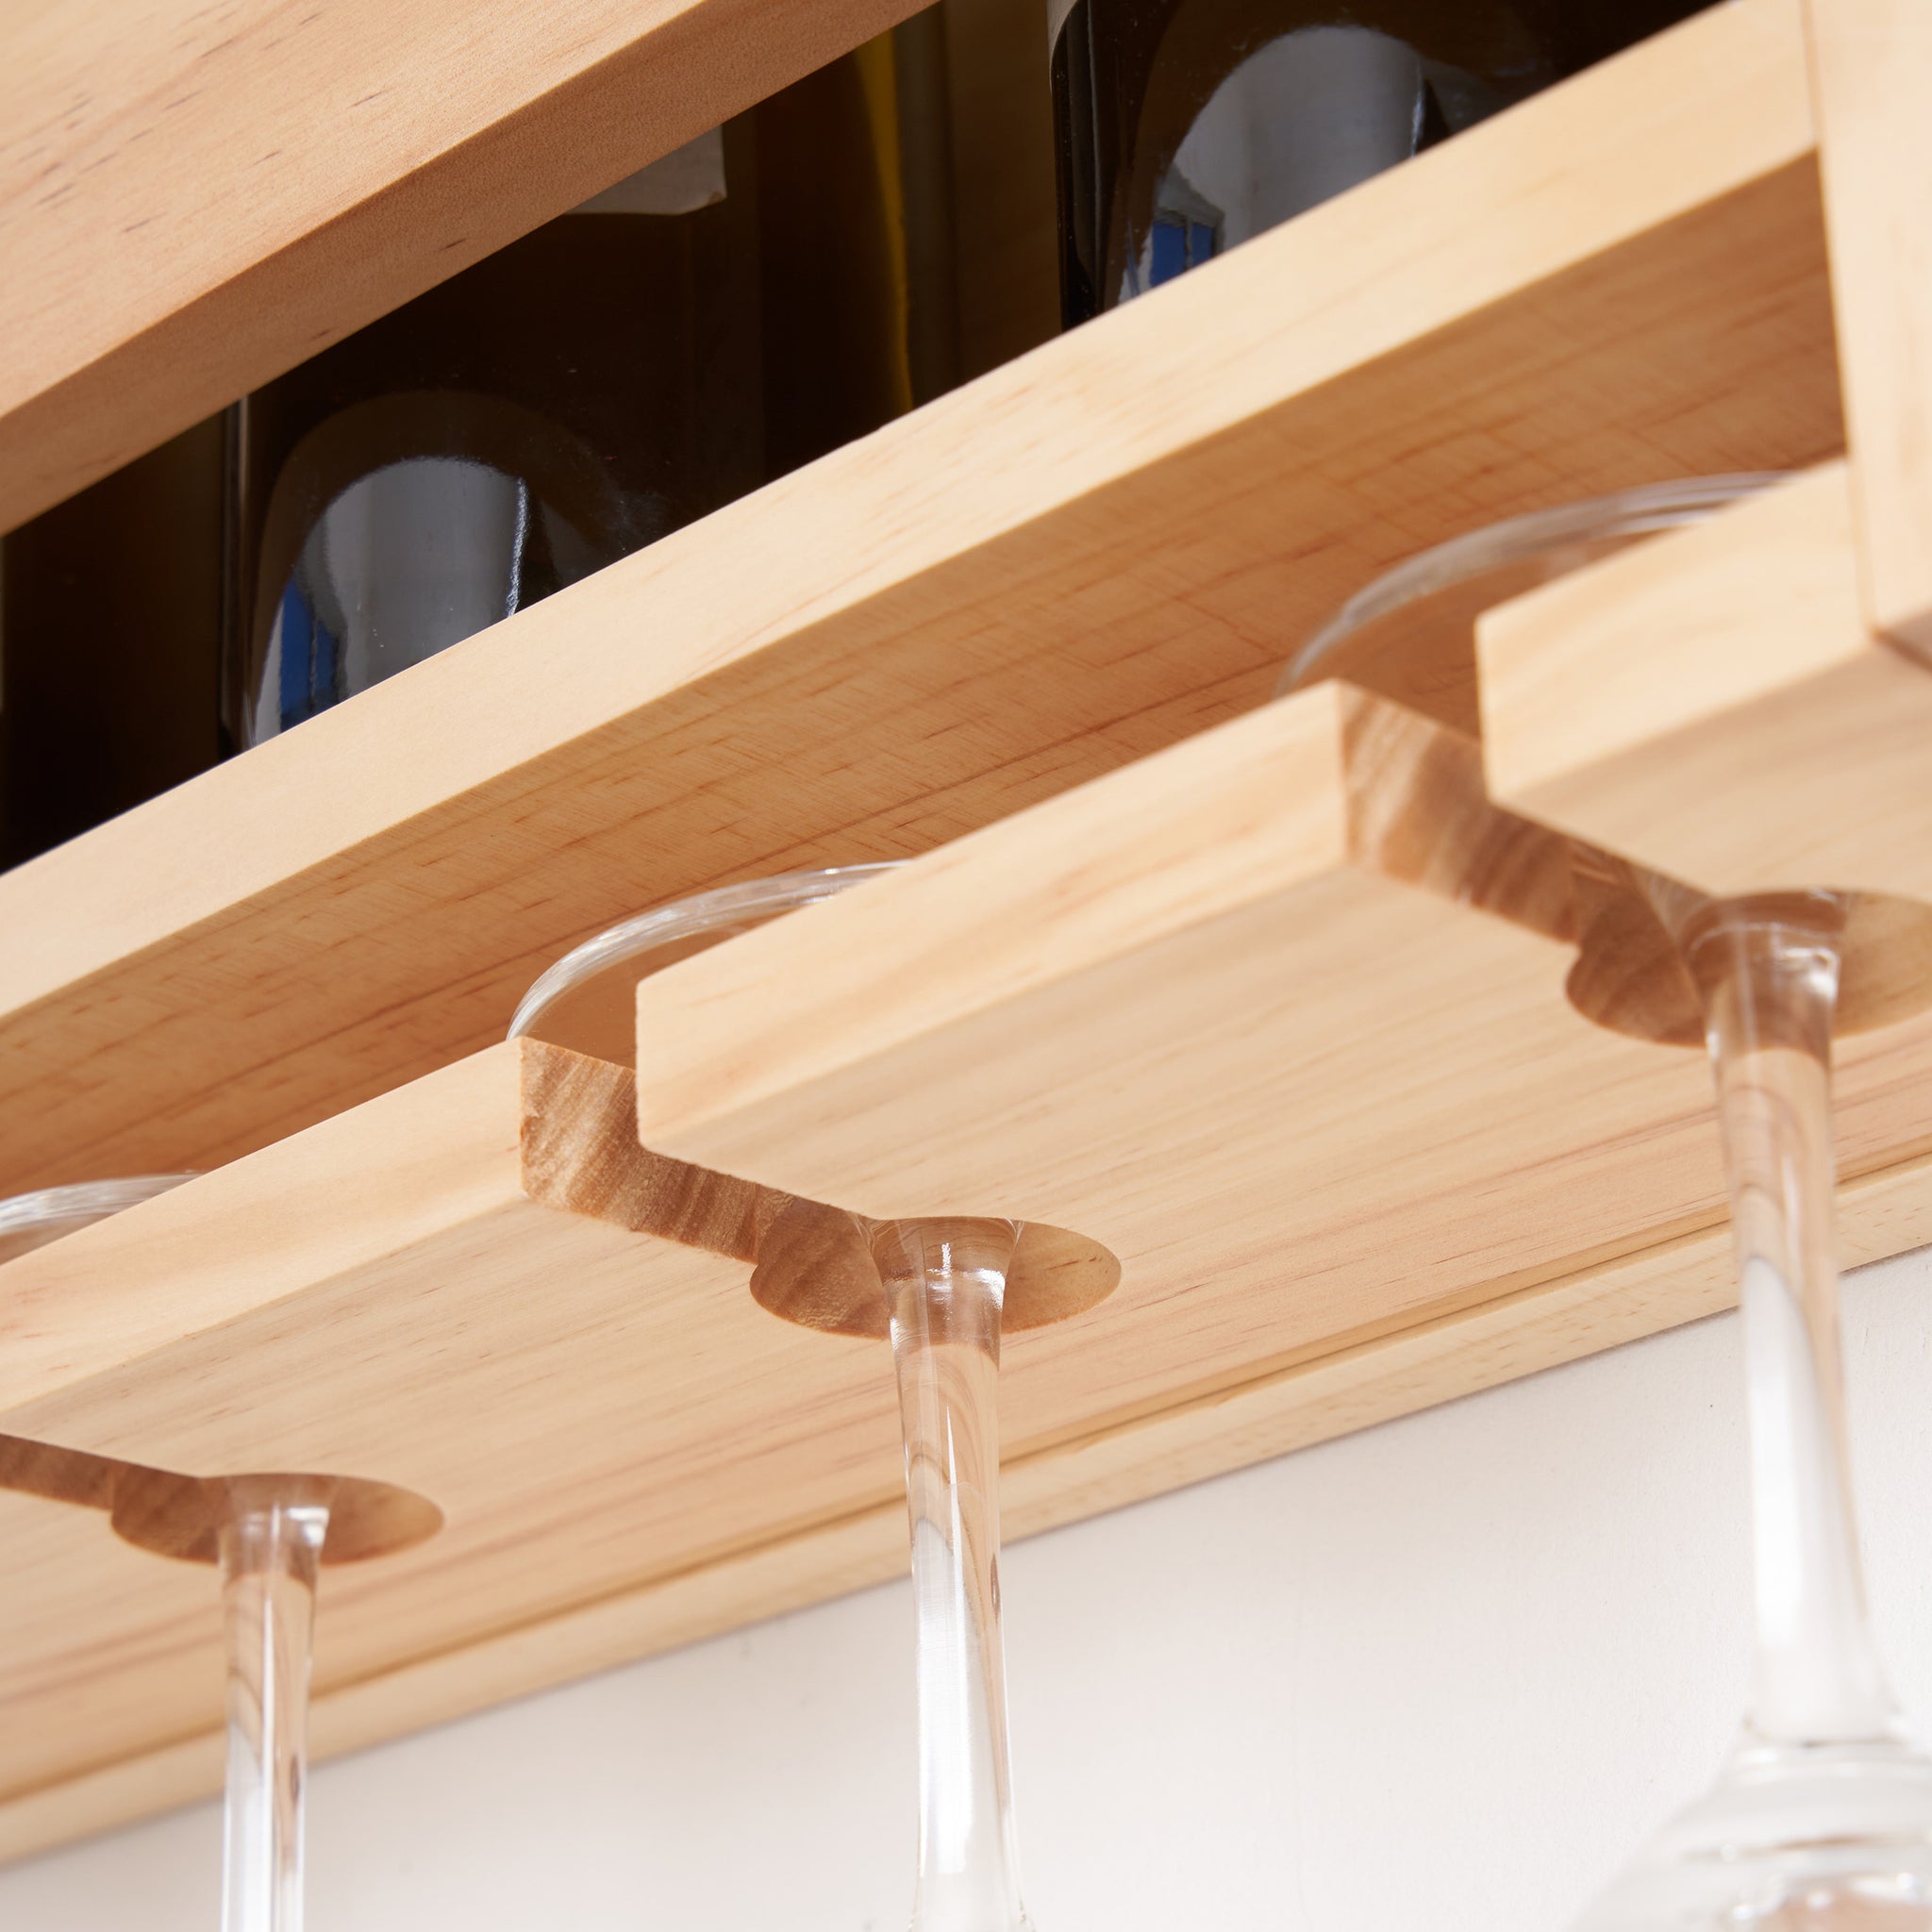 Wall mounted wine rack with cup holder wine racks natural-kitchen-american traditional-pine